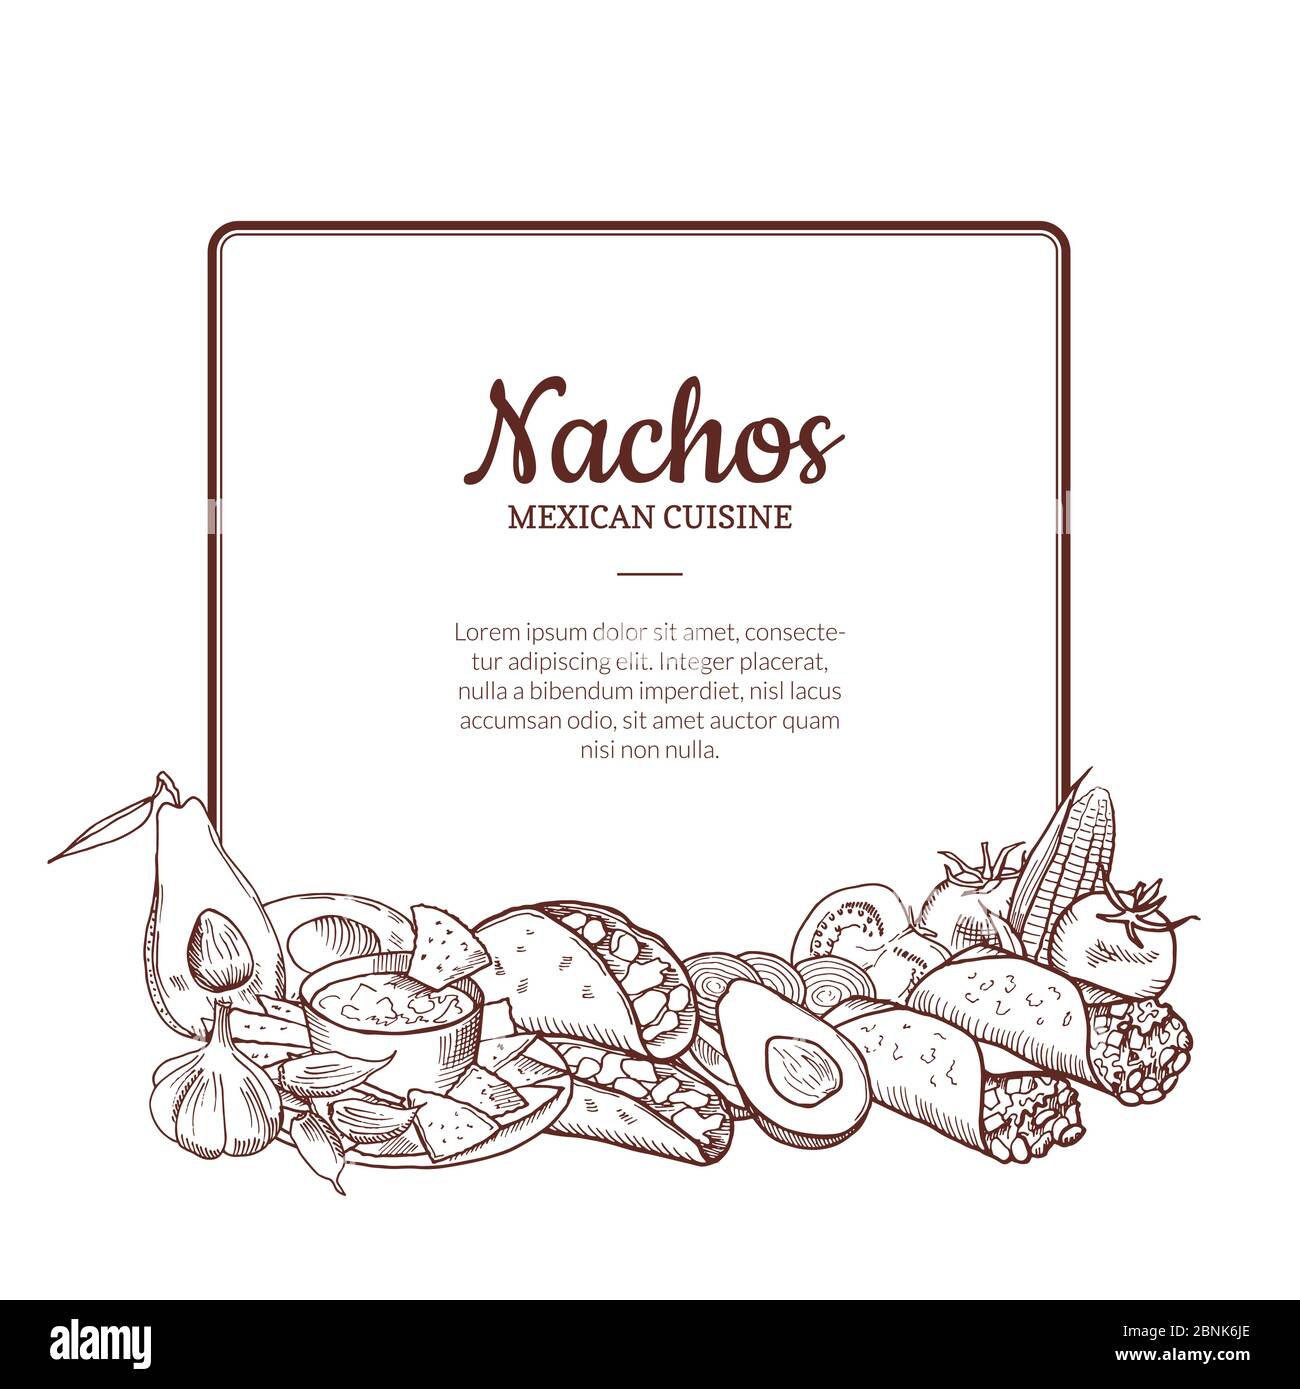 Vector sketched mexican food elements Stock Vector